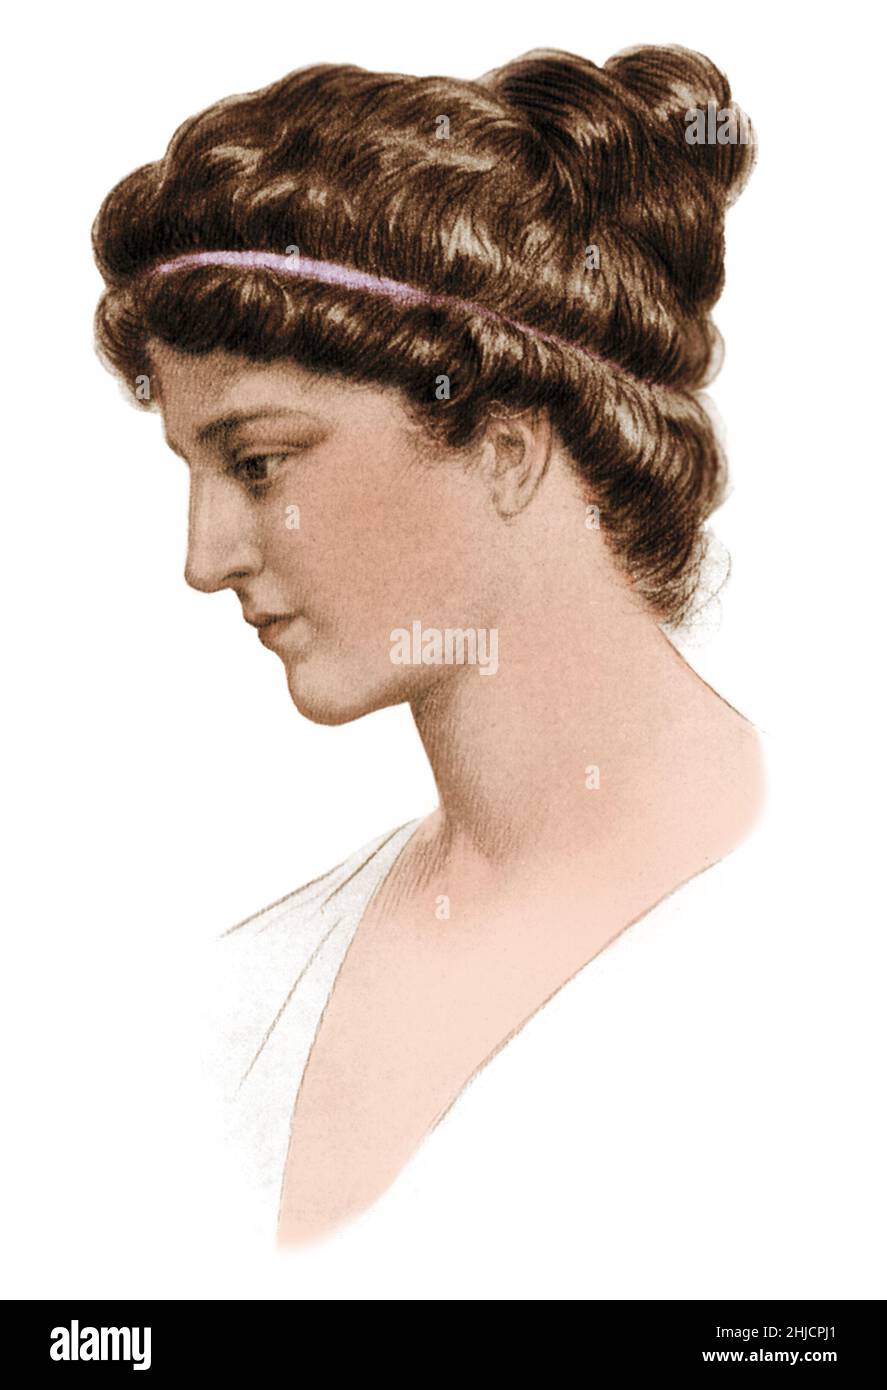 Hypatia, drawn by Jules Maurice Gaspard (1862‚Äì1919), illustration for Elbert Hubbard's 1908 fictional biography. Hypatia (c. 350/370 - 415 AD) was the daughter of Theon, a mathematician in Alexandria, Egypt. She became a prominent mathematician, astronomer, and Neoplatonist philosopher and teacher. She was murdered by a Christian mob. Colorized. Stock Photo